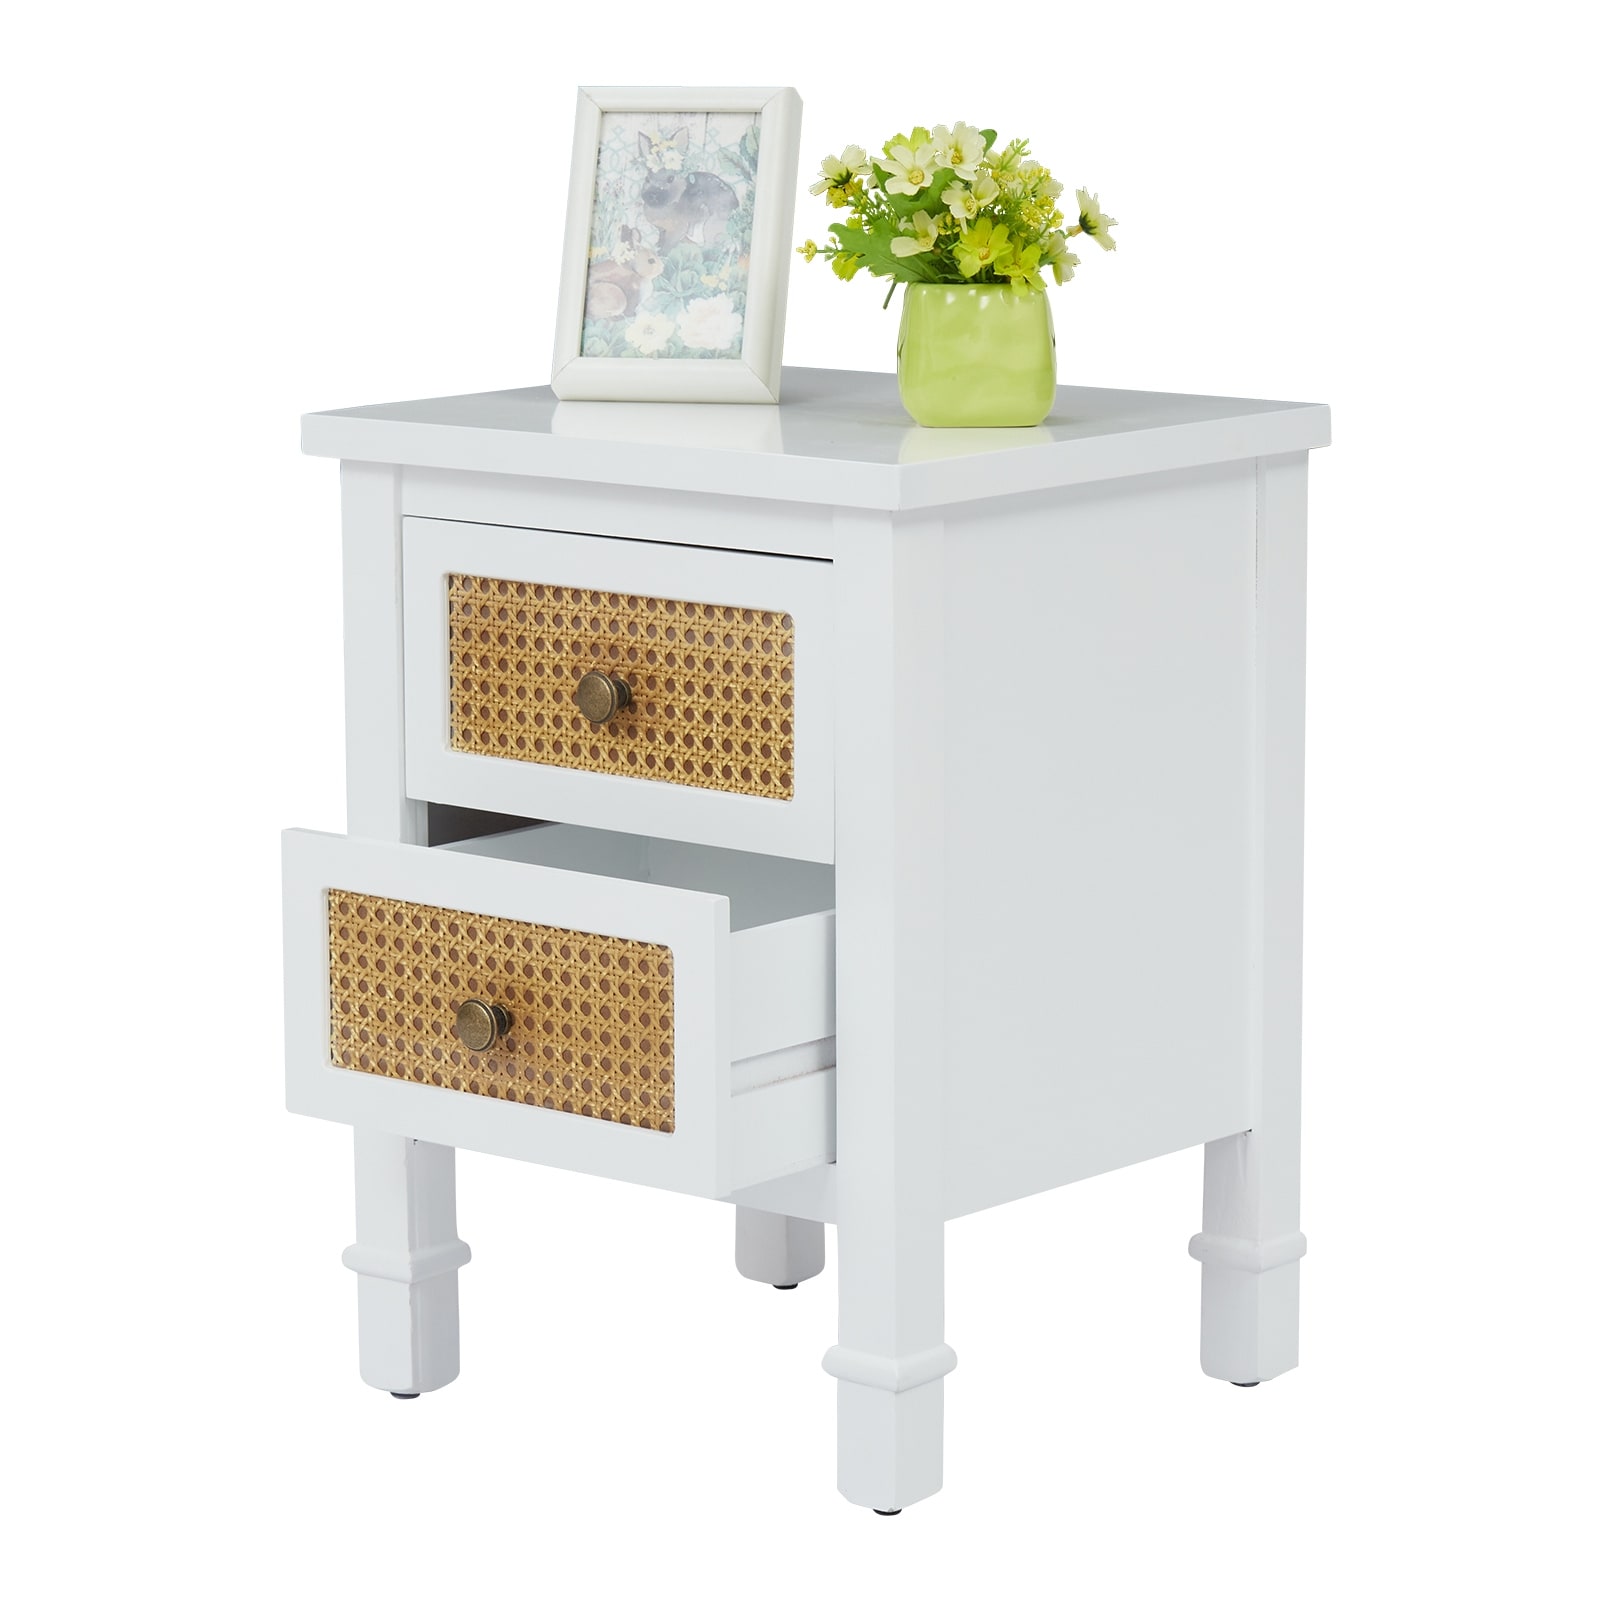 Farmhouse Nightstand End Table with 2 Rattan Decorated Drawers, Night Stand for Bedroom, Living Room, Dorm (White)